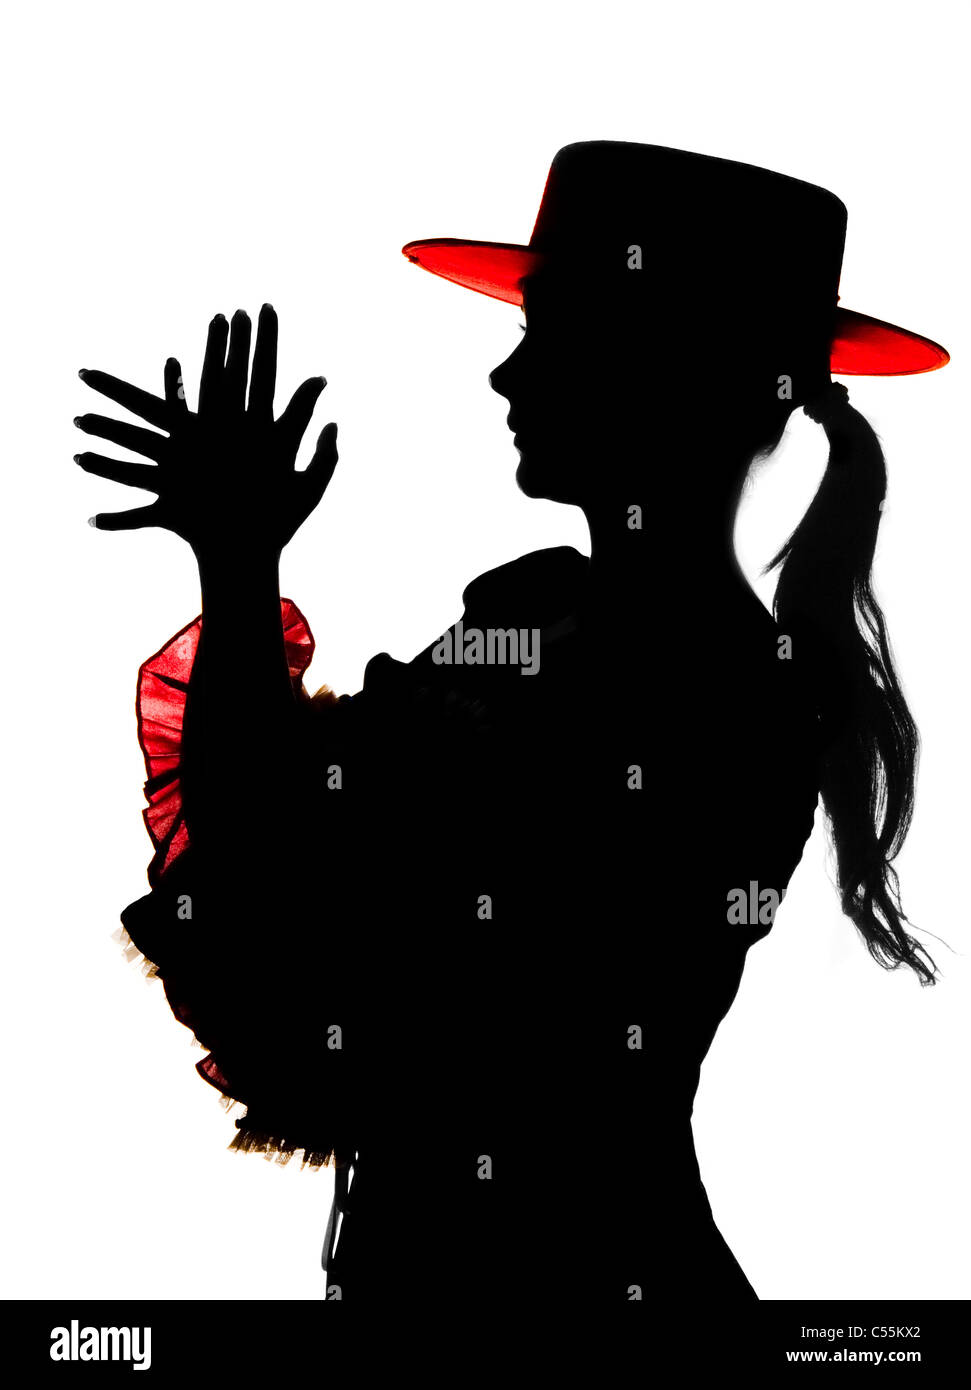 Silhouette No Photoshop Rendered Product Of A Spanish Flamenco Dancer Stock Photo Alamy